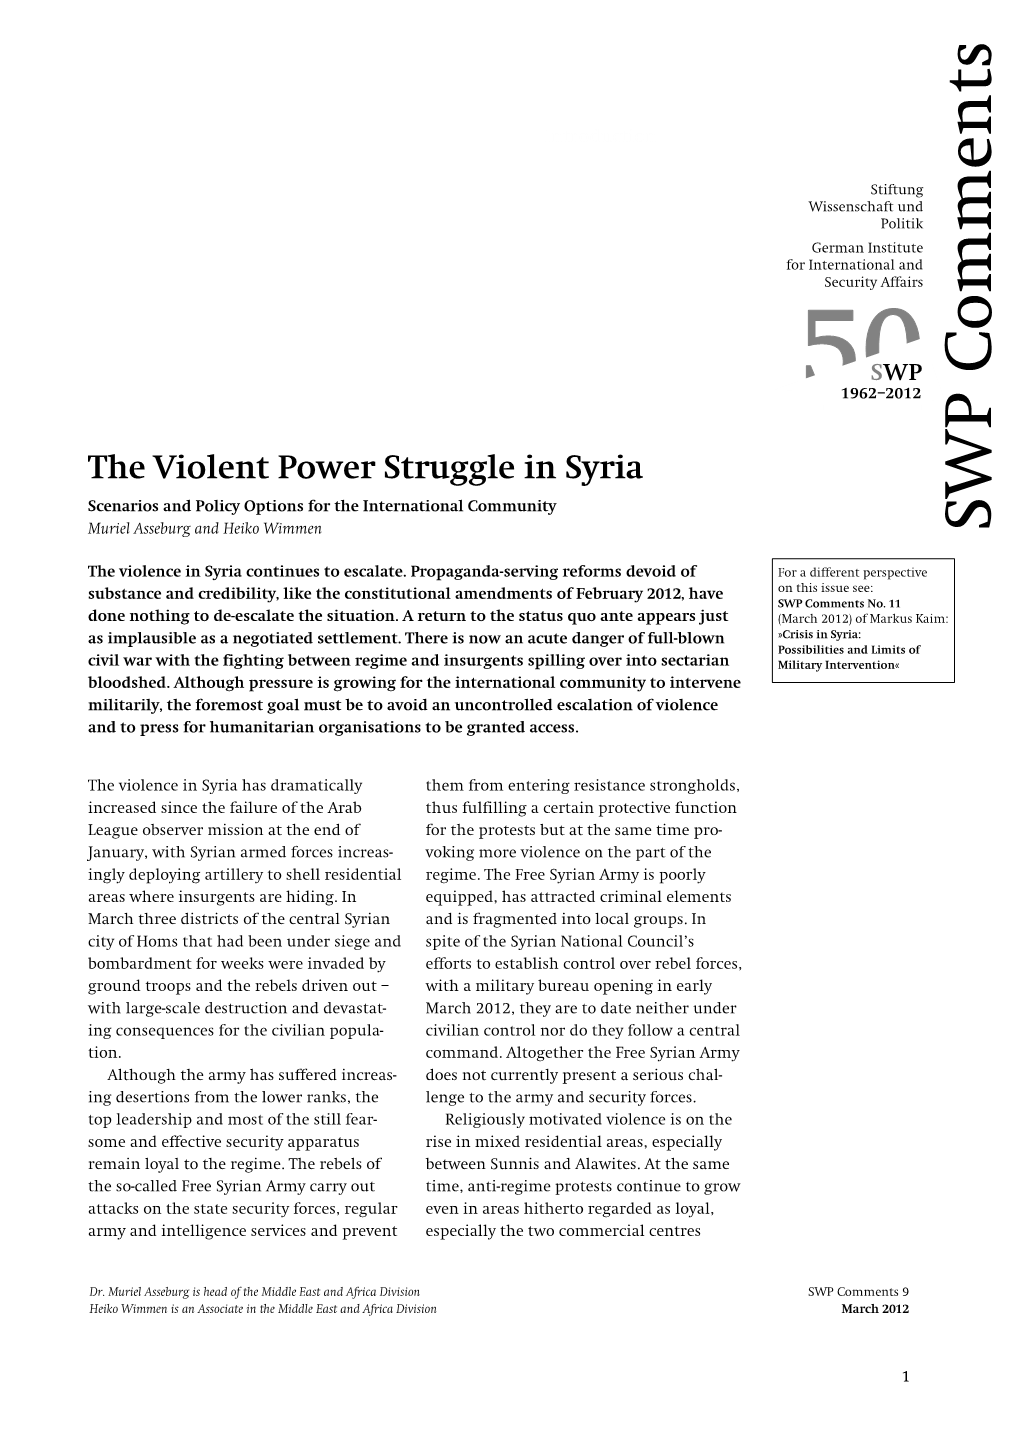 The Violent Power Struggle in Syria WP Scenarios and Policy Options for the International Community